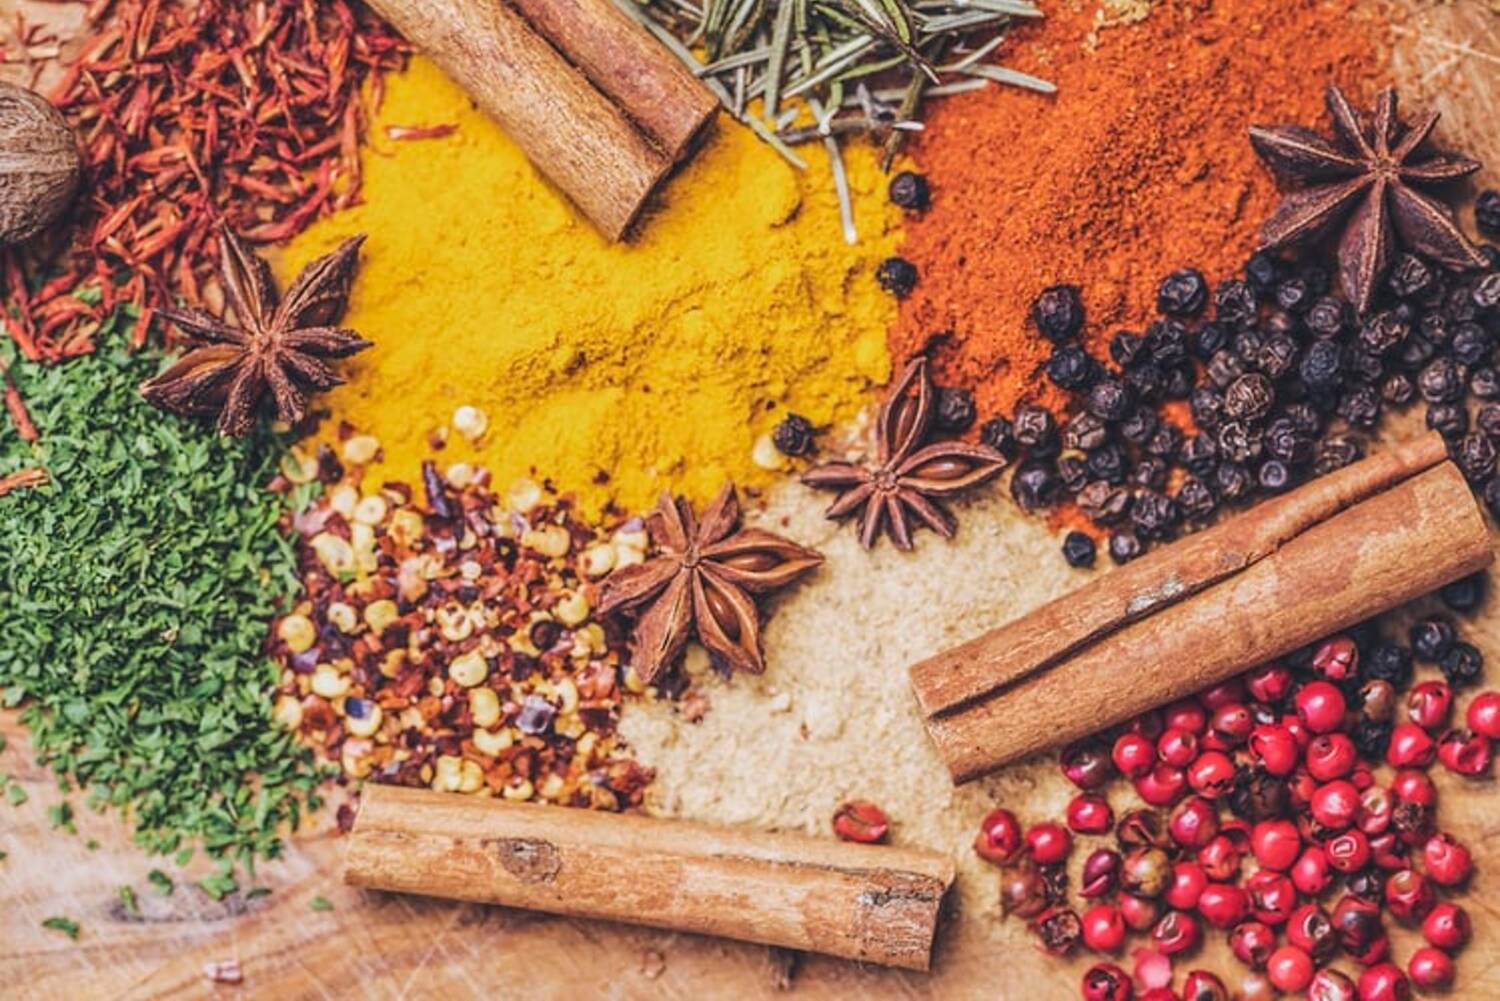 Close-up of small piles of colourful spices, including cinnamon sticks, turmeric and star anise.